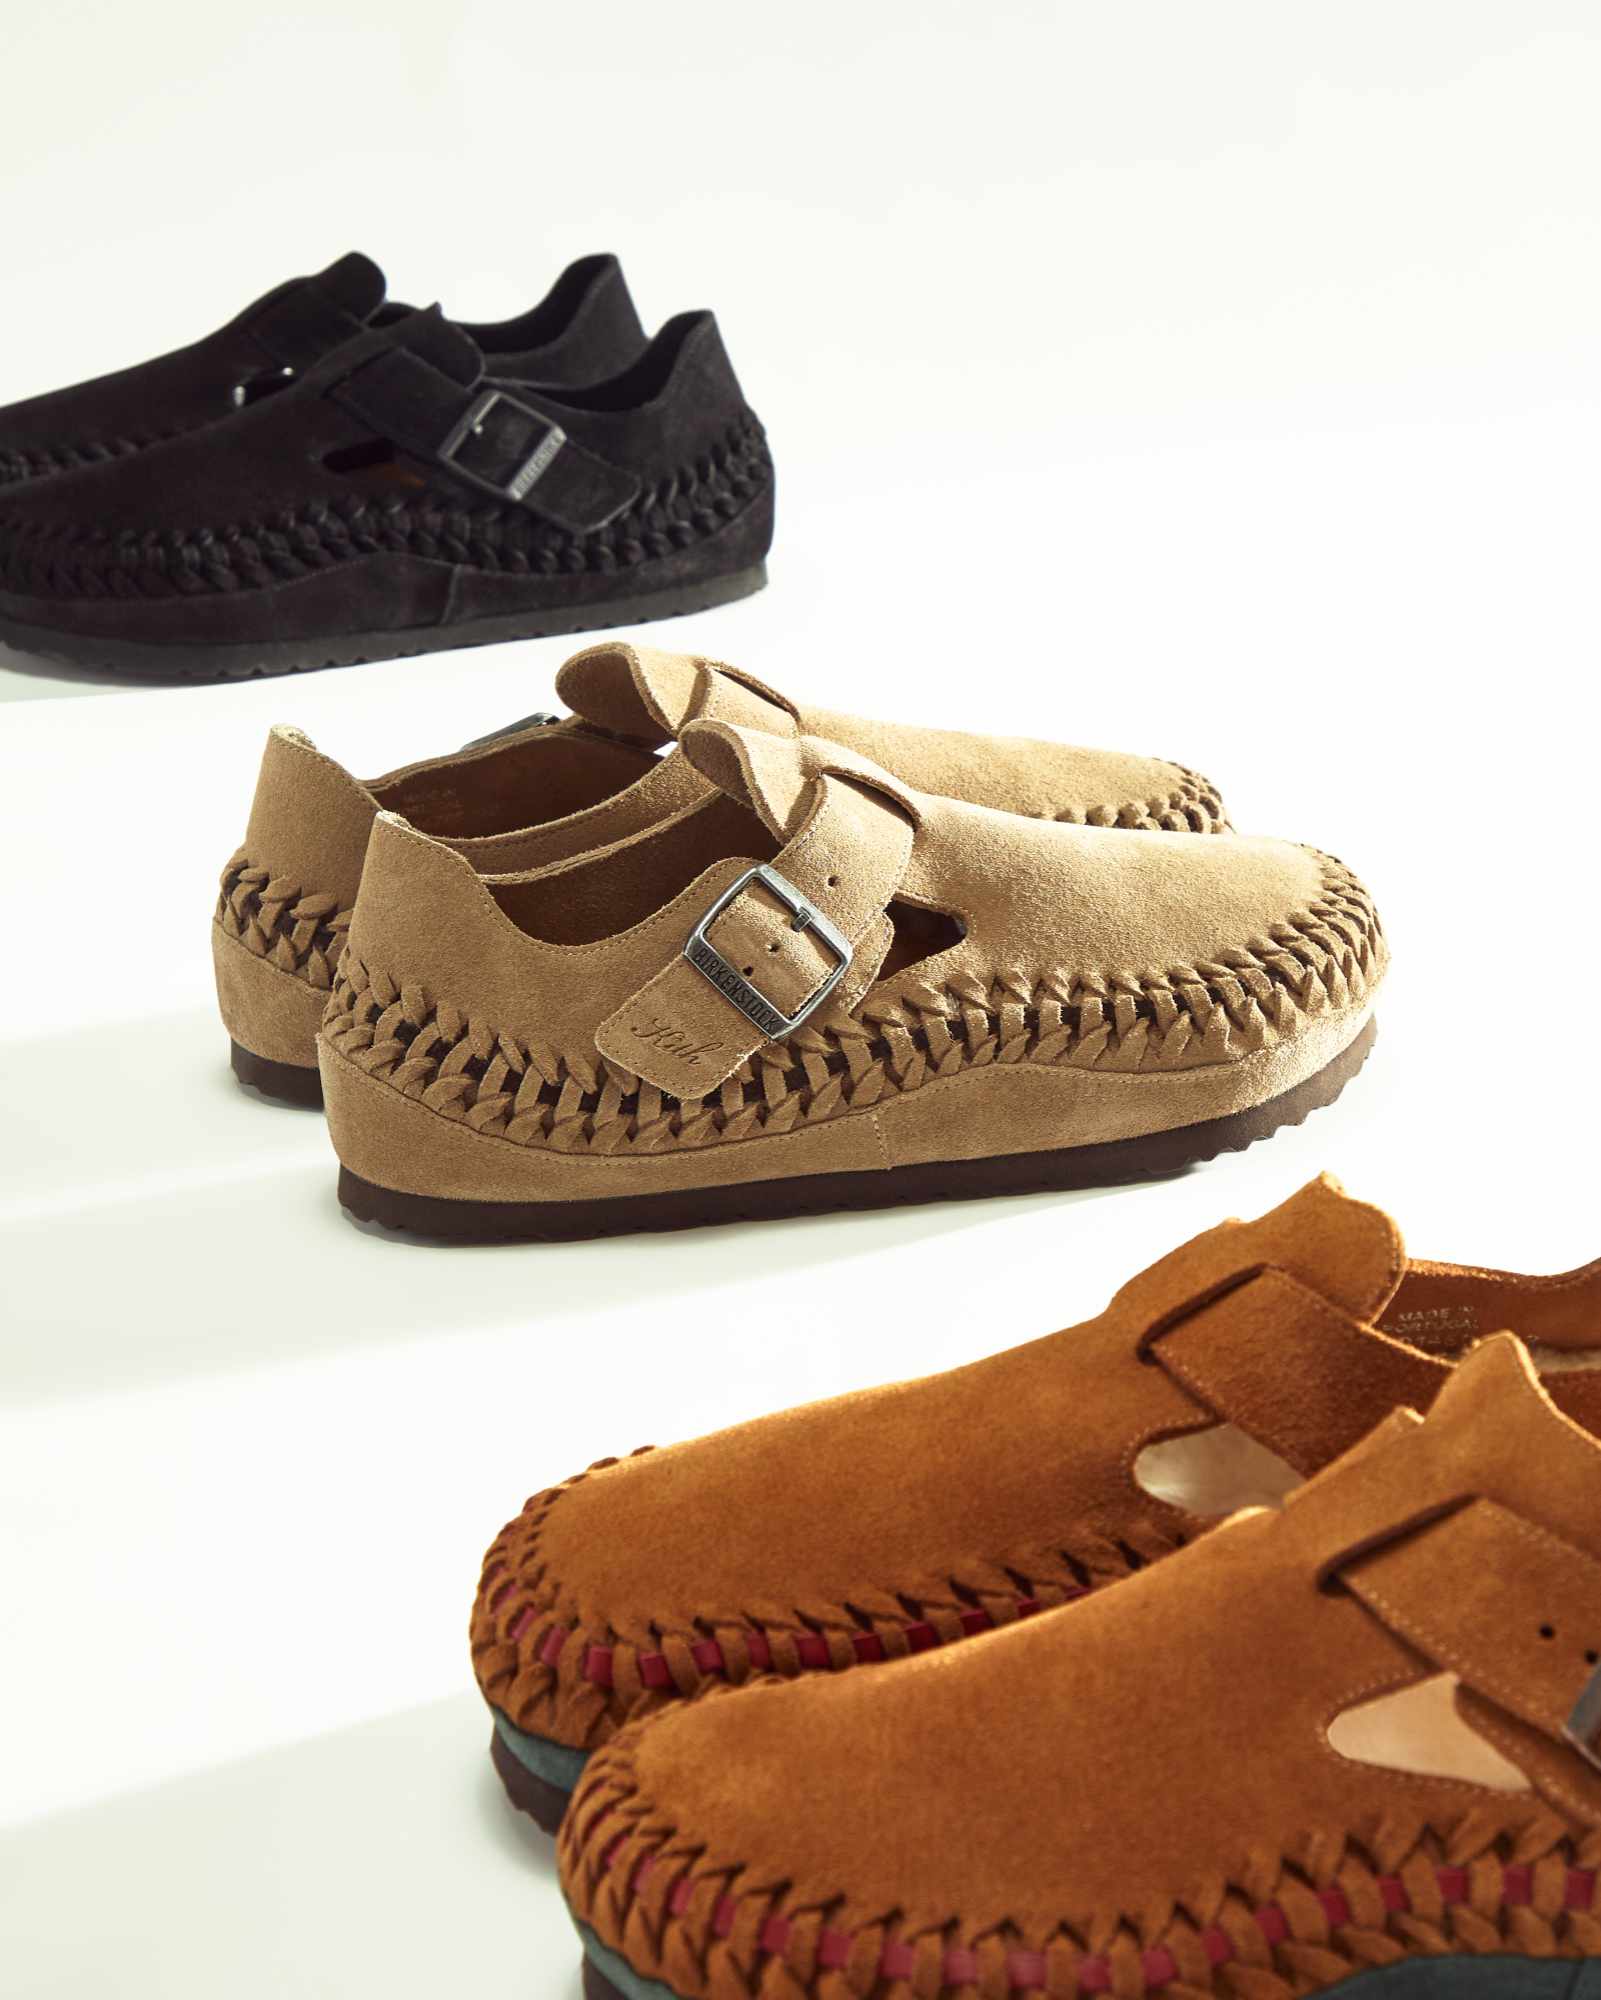 KITH & Birkenstock's collaborative braided London sandals in beige, brown, and black suede